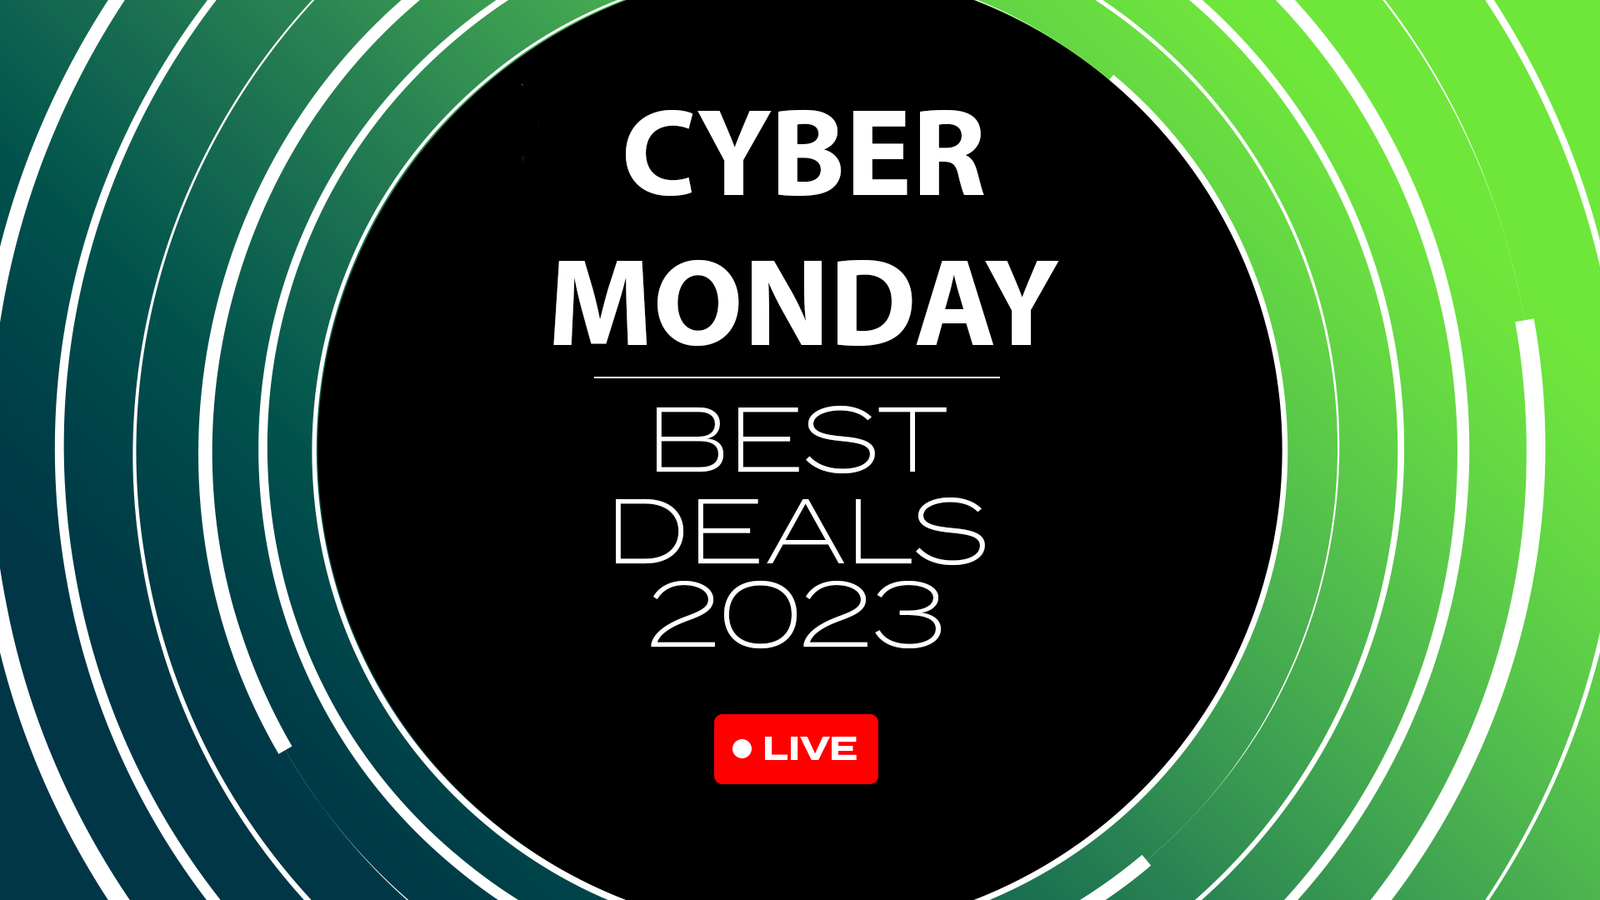 When is Cyber Monday 2023 and what are the best deals?